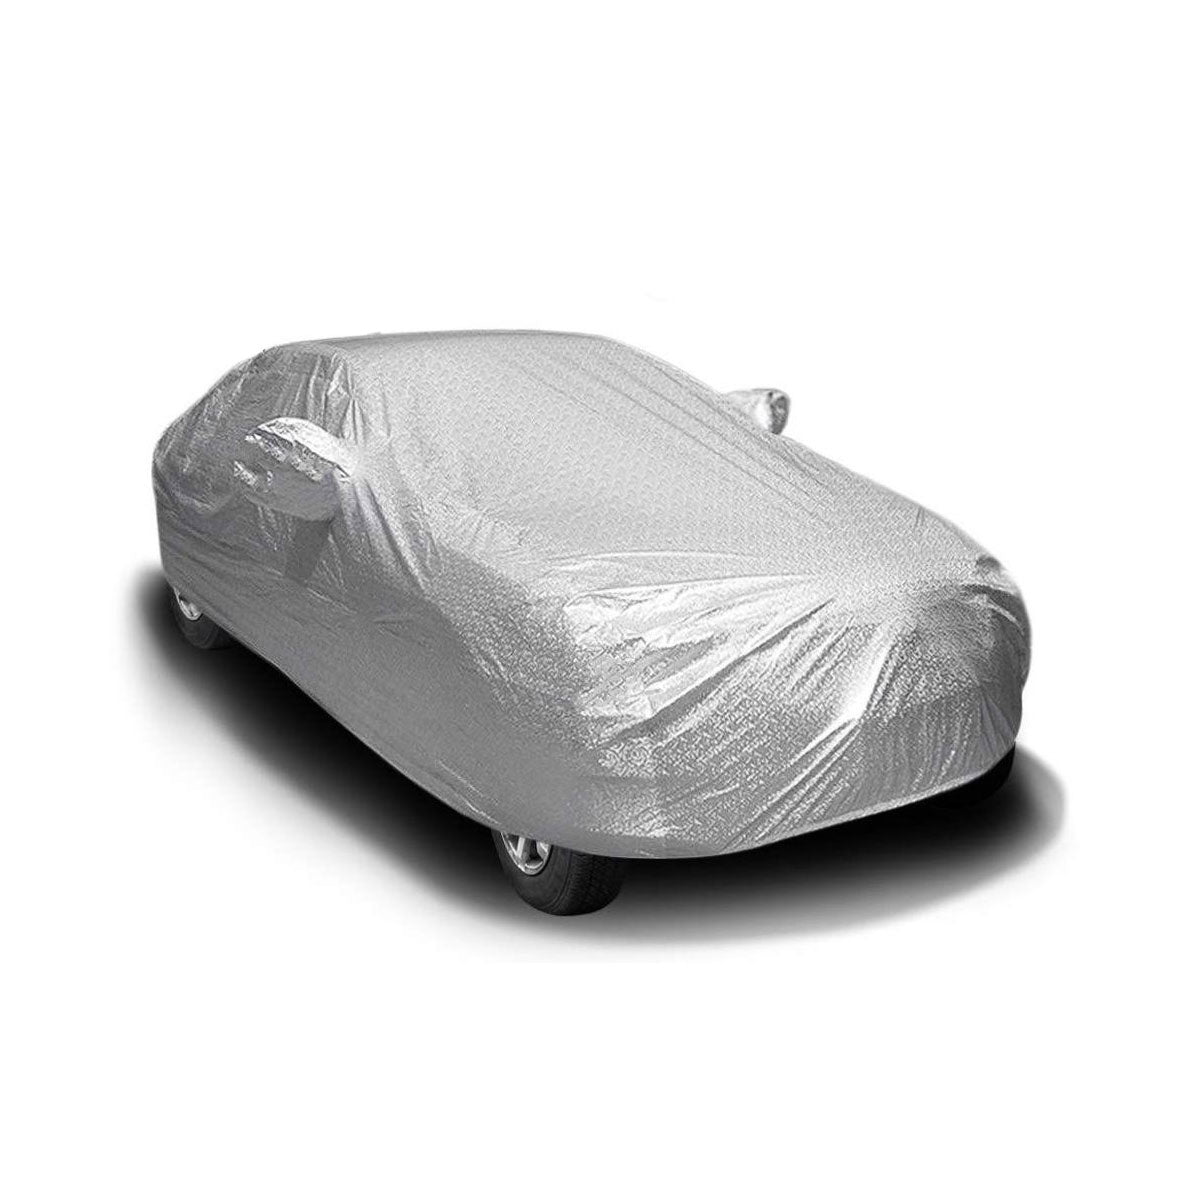 Oshotto Spyro Silver Anti Reflective, dustproof and Water Proof Car Body Cover with Mirror Pockets For BMW 5 Series